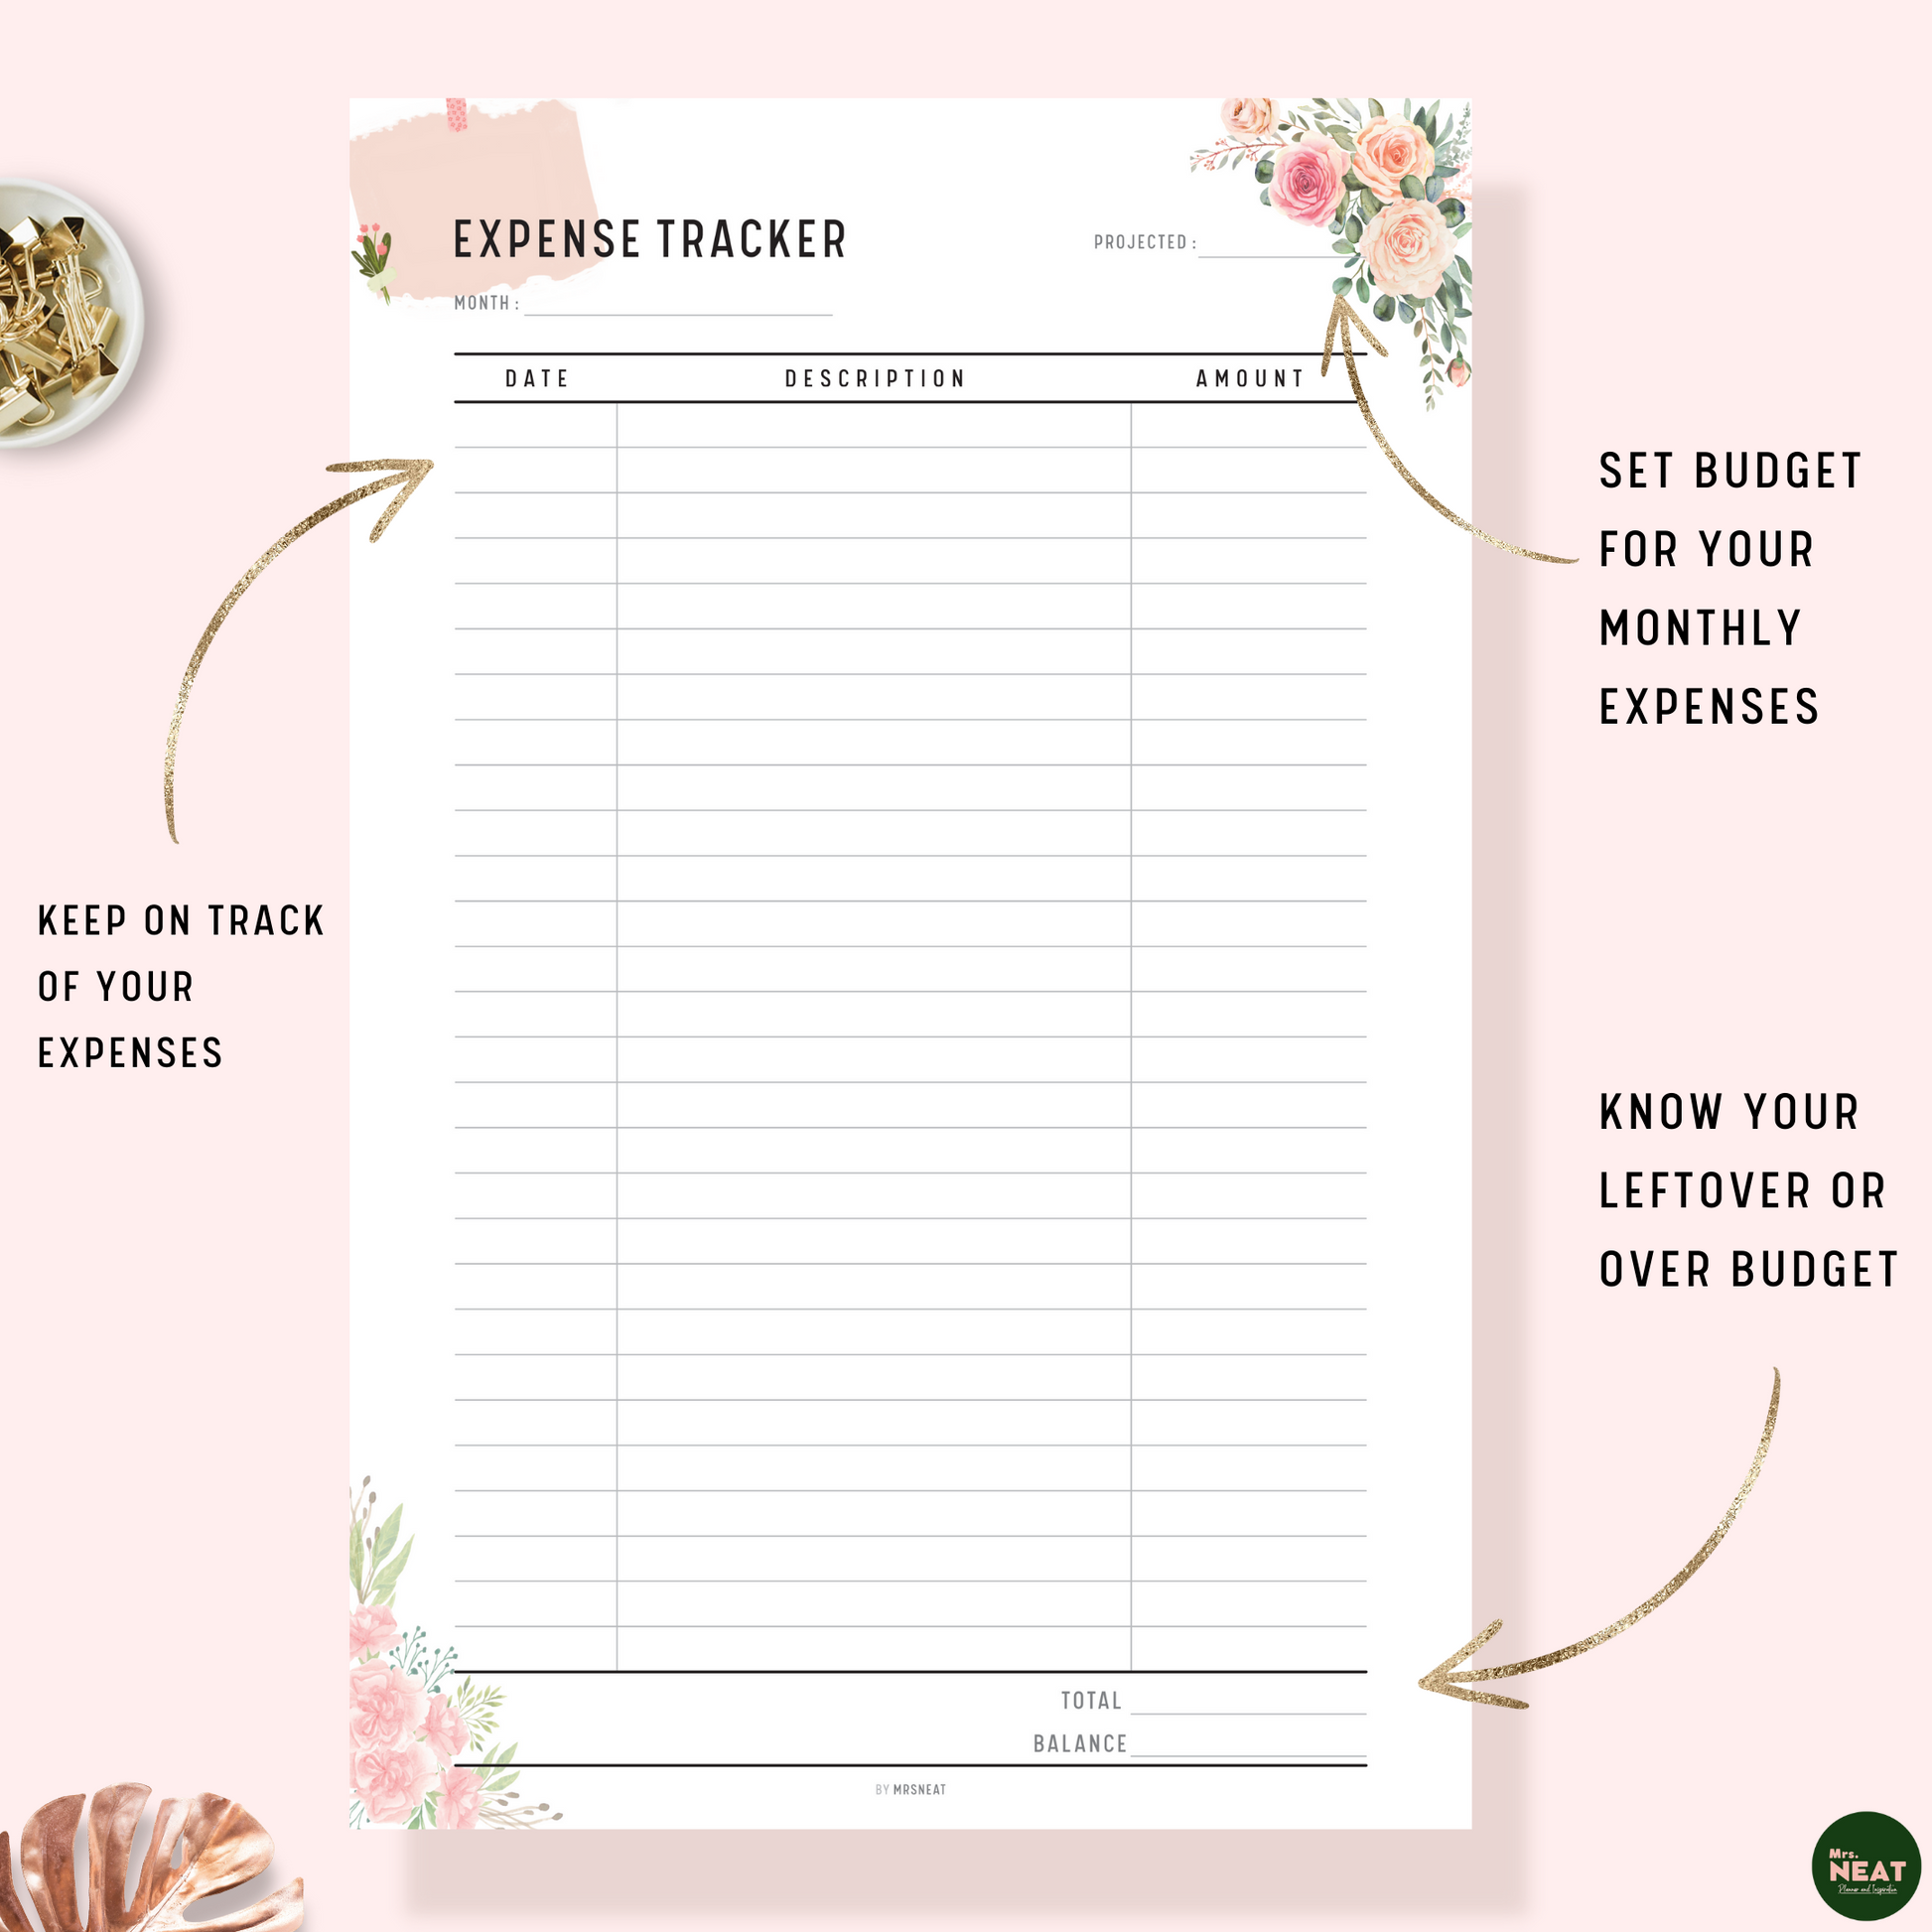 Floral Expense Tracker Planner with room for monthly projected, actual expenses, and left over money